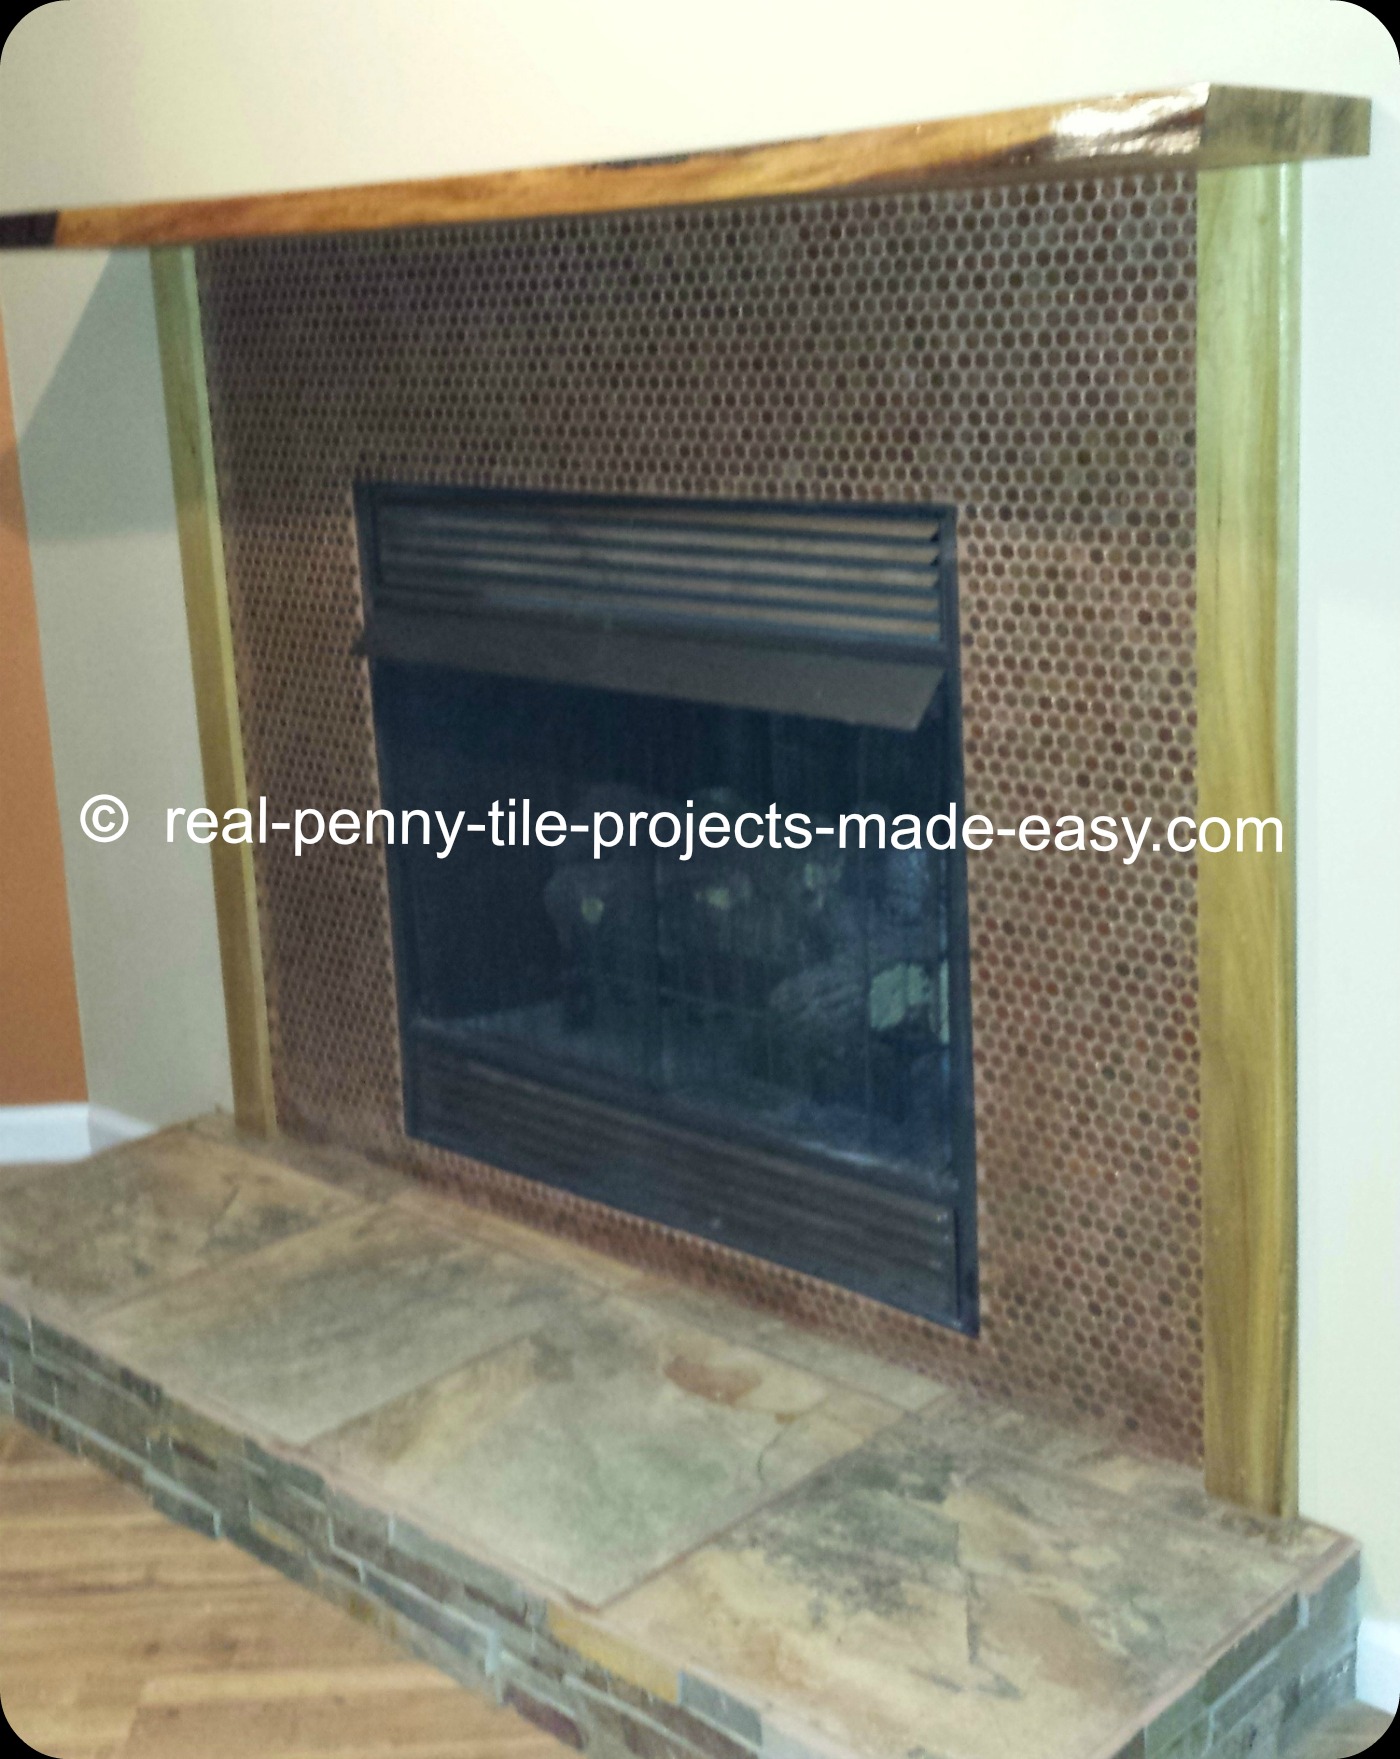 Fireplace wall covered with penny tile sheets (pennies).